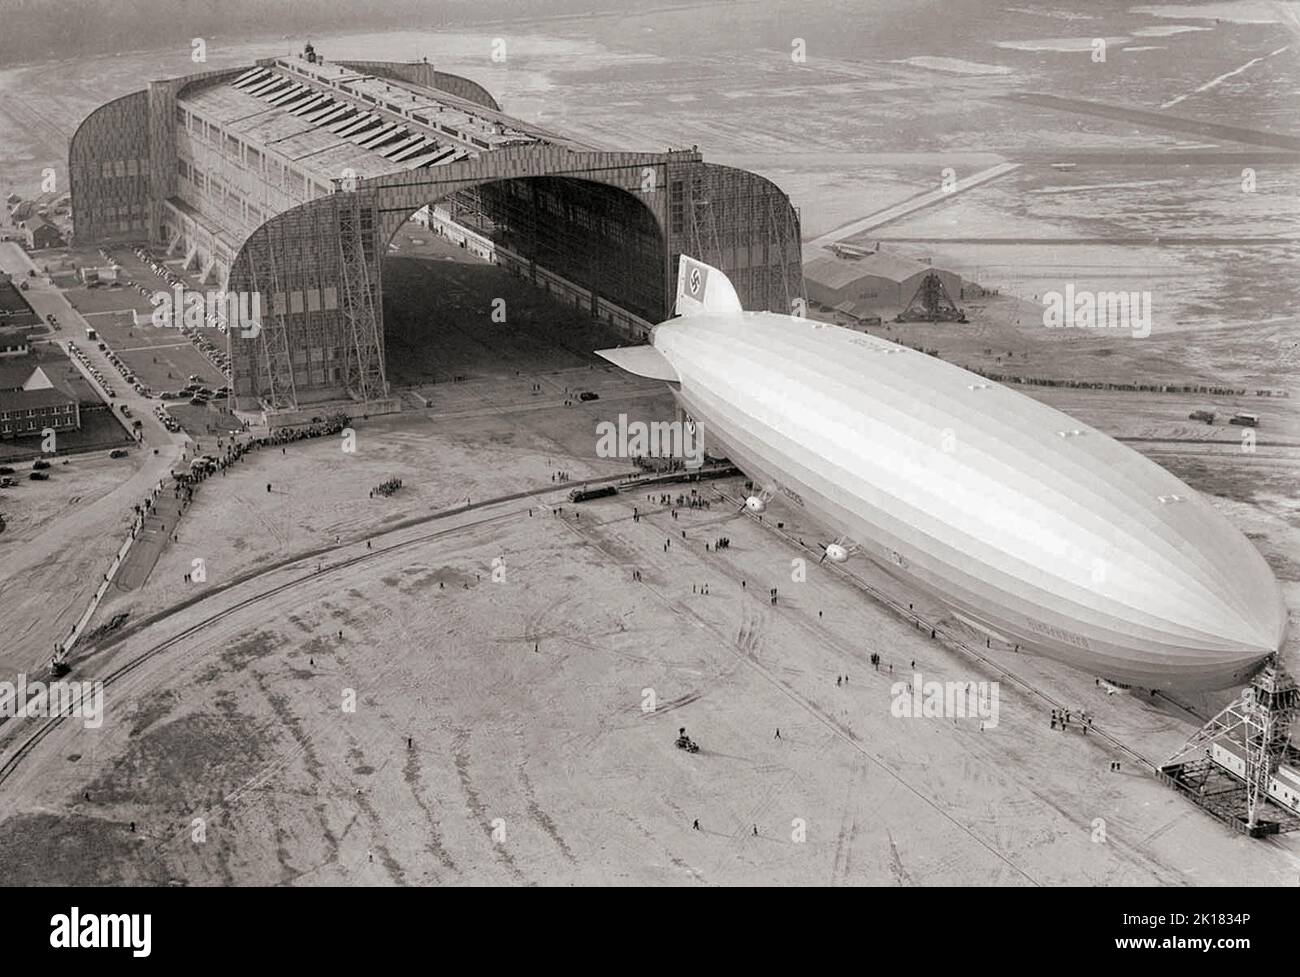 A German-built Zeppelin Hindenburg entering into the U.S. Navy hangar, its nose hooked to the mobile mooring tower, at Lakehurst, New Jersey, on May 9, 1936. The rigid airship had just set a record for its first north Atlantic crossing, the first leg of ten scheduled round trips between Germany and America. Stock Photo